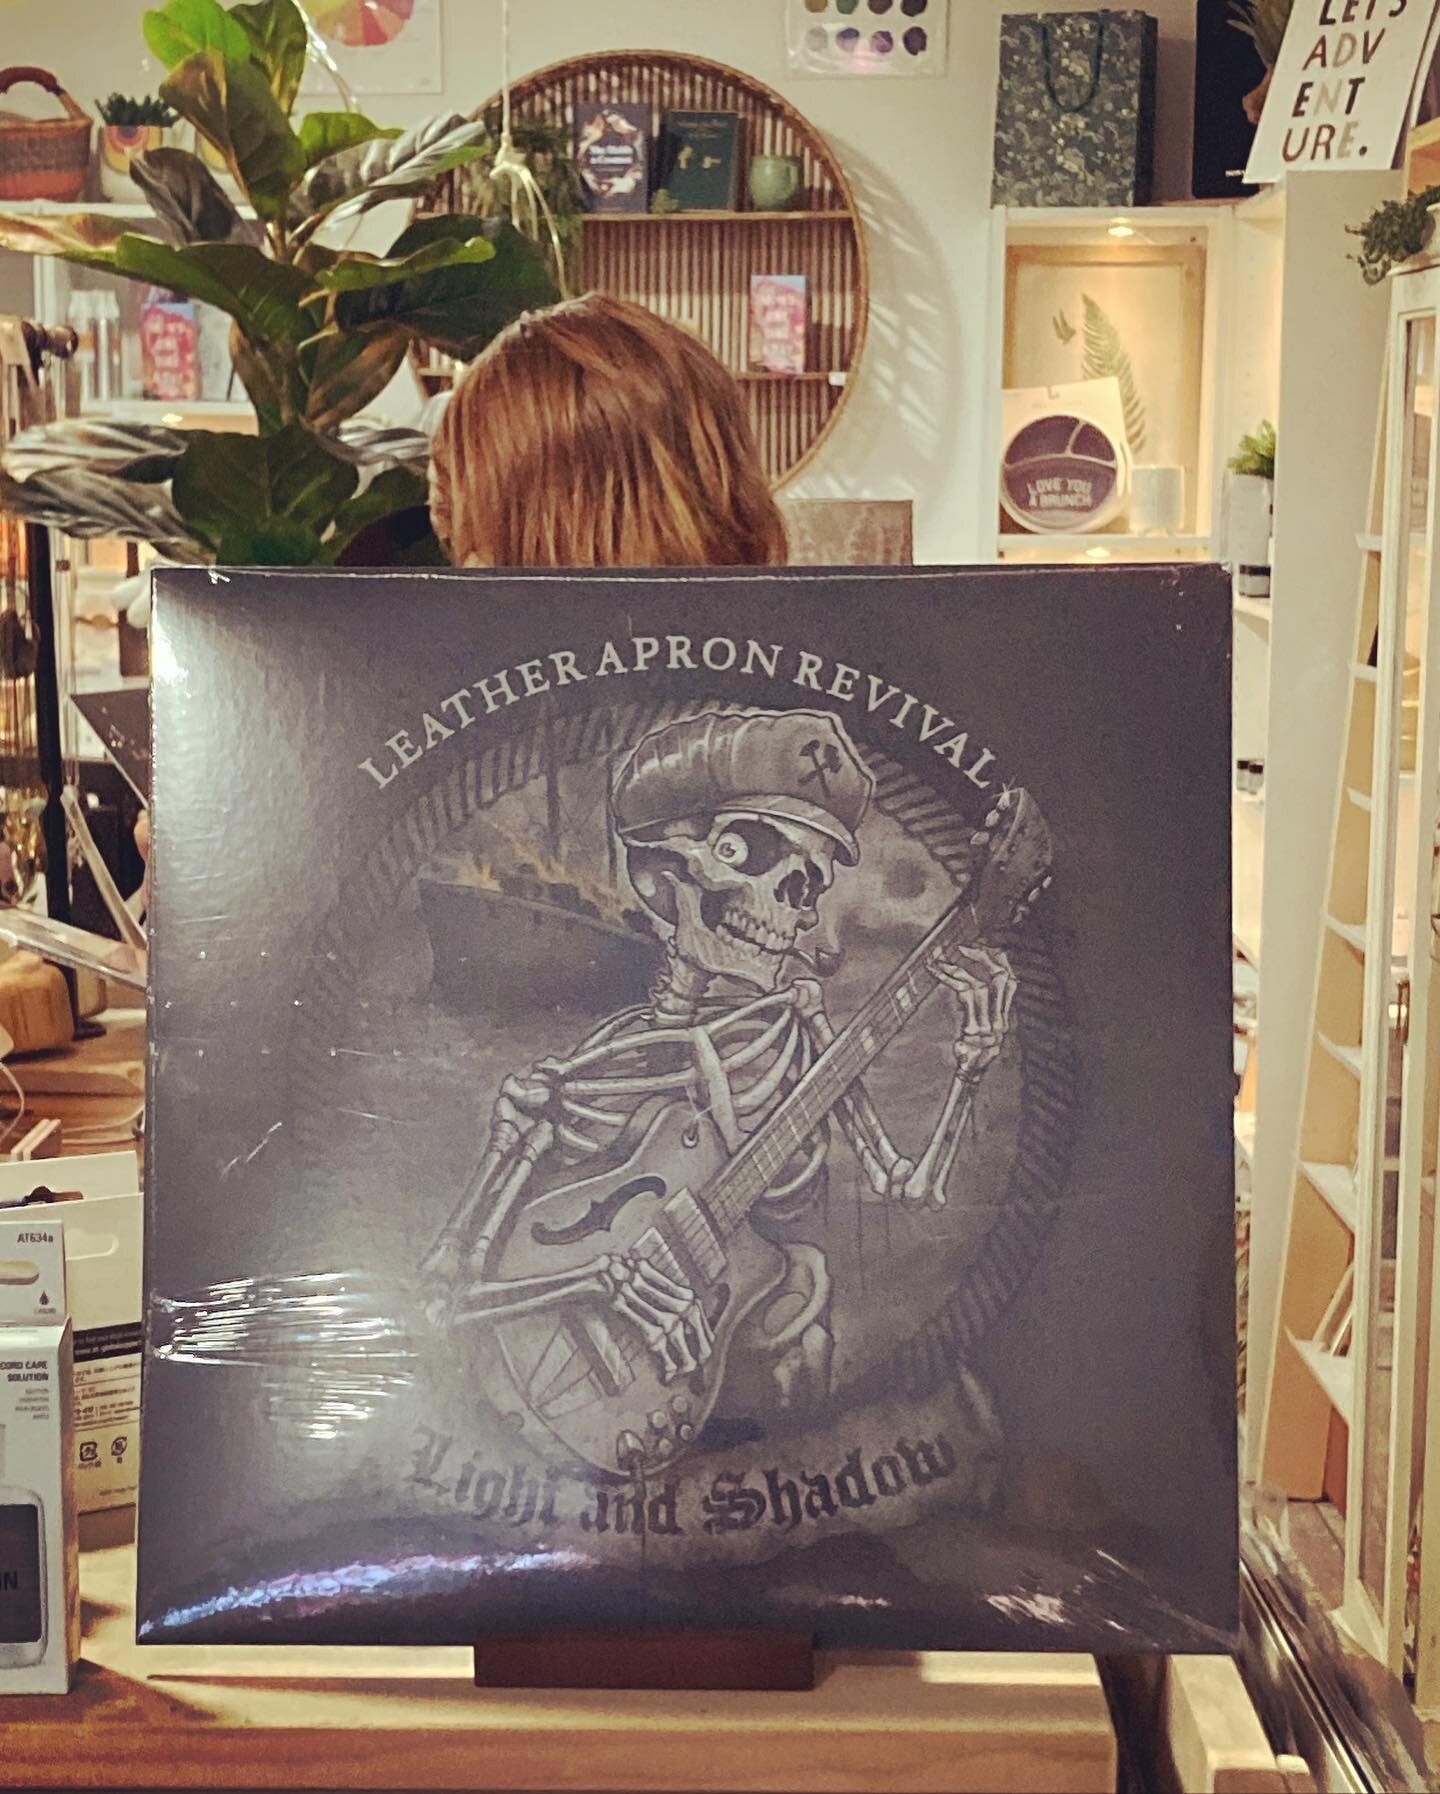 Our album Light and Shadow is now available @publicvinyl in Creston, BC. Check out their awesome shop next time your in Creston, BC. Thanks guys!